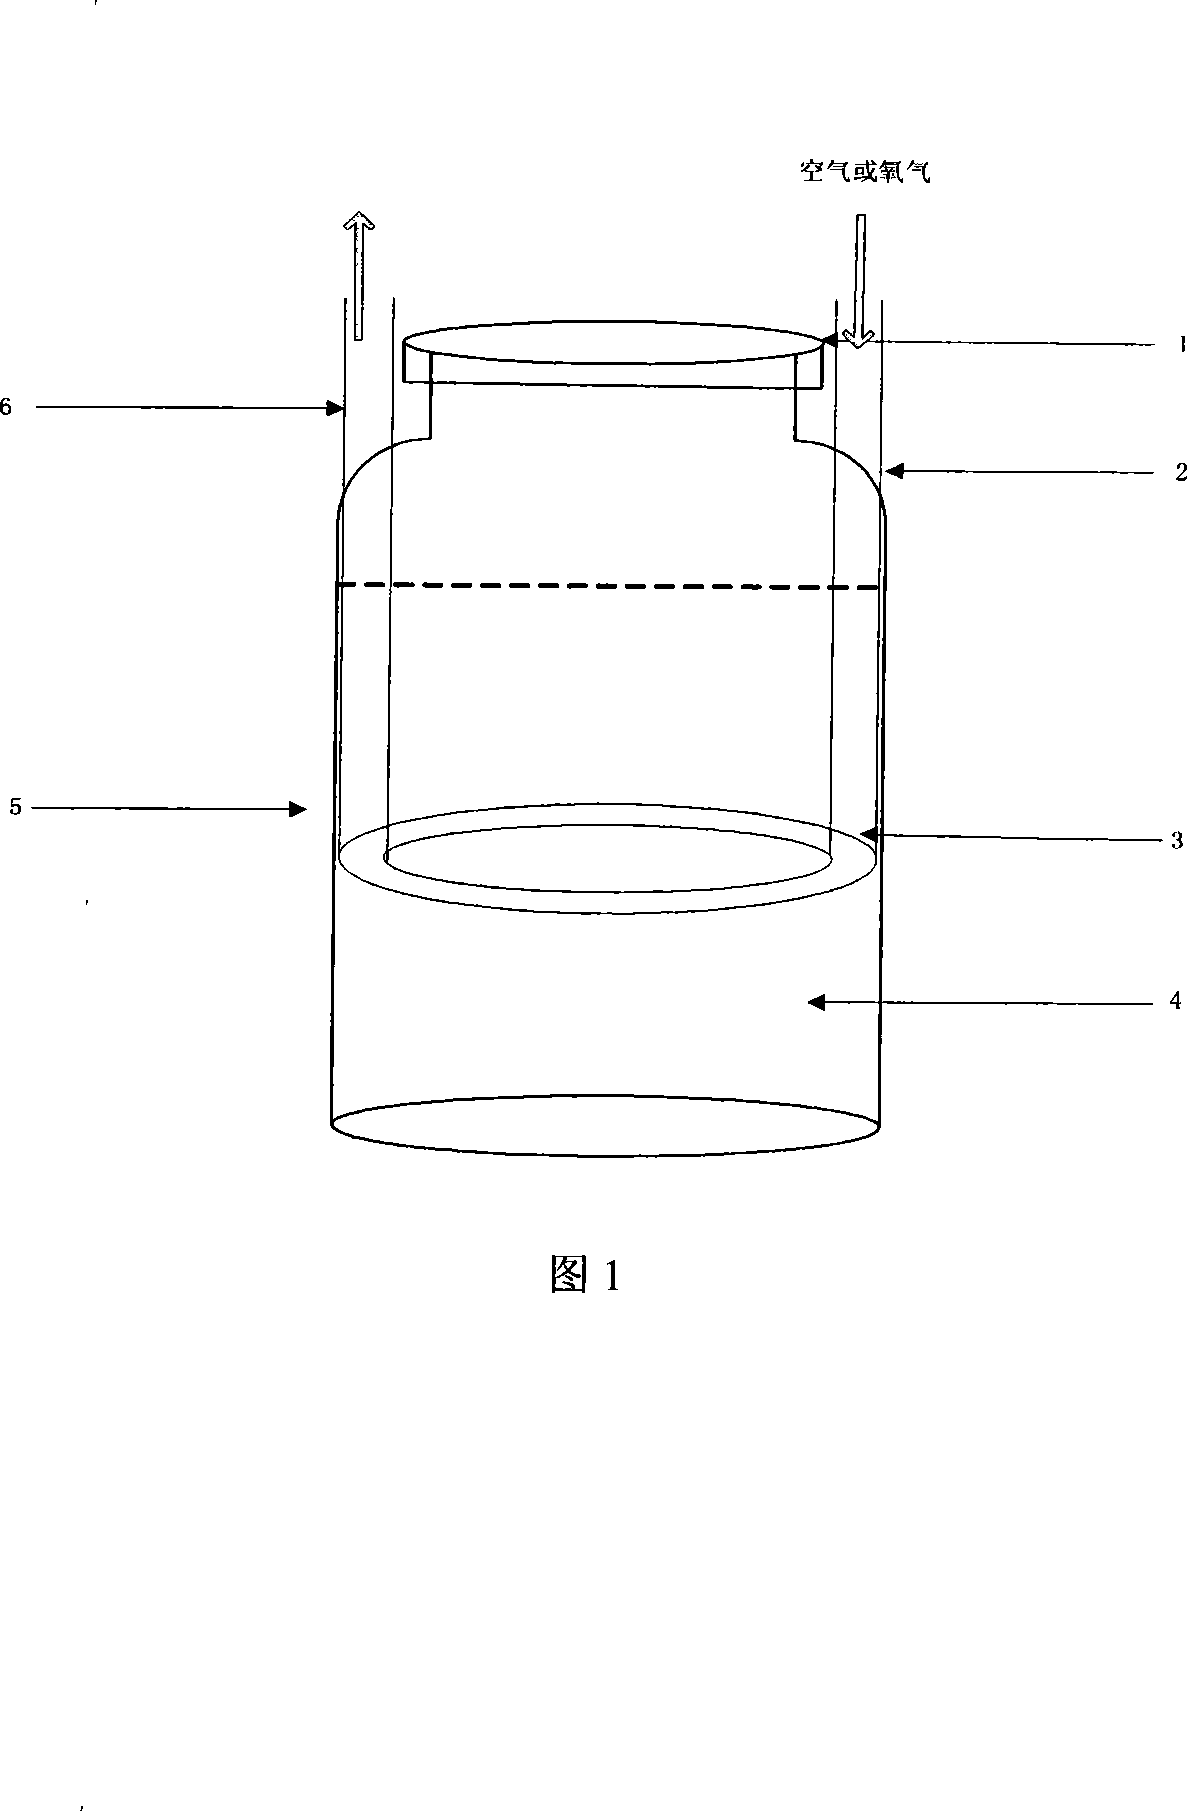 Integral nitrifying bacteria culture and preservation method as well as reactor